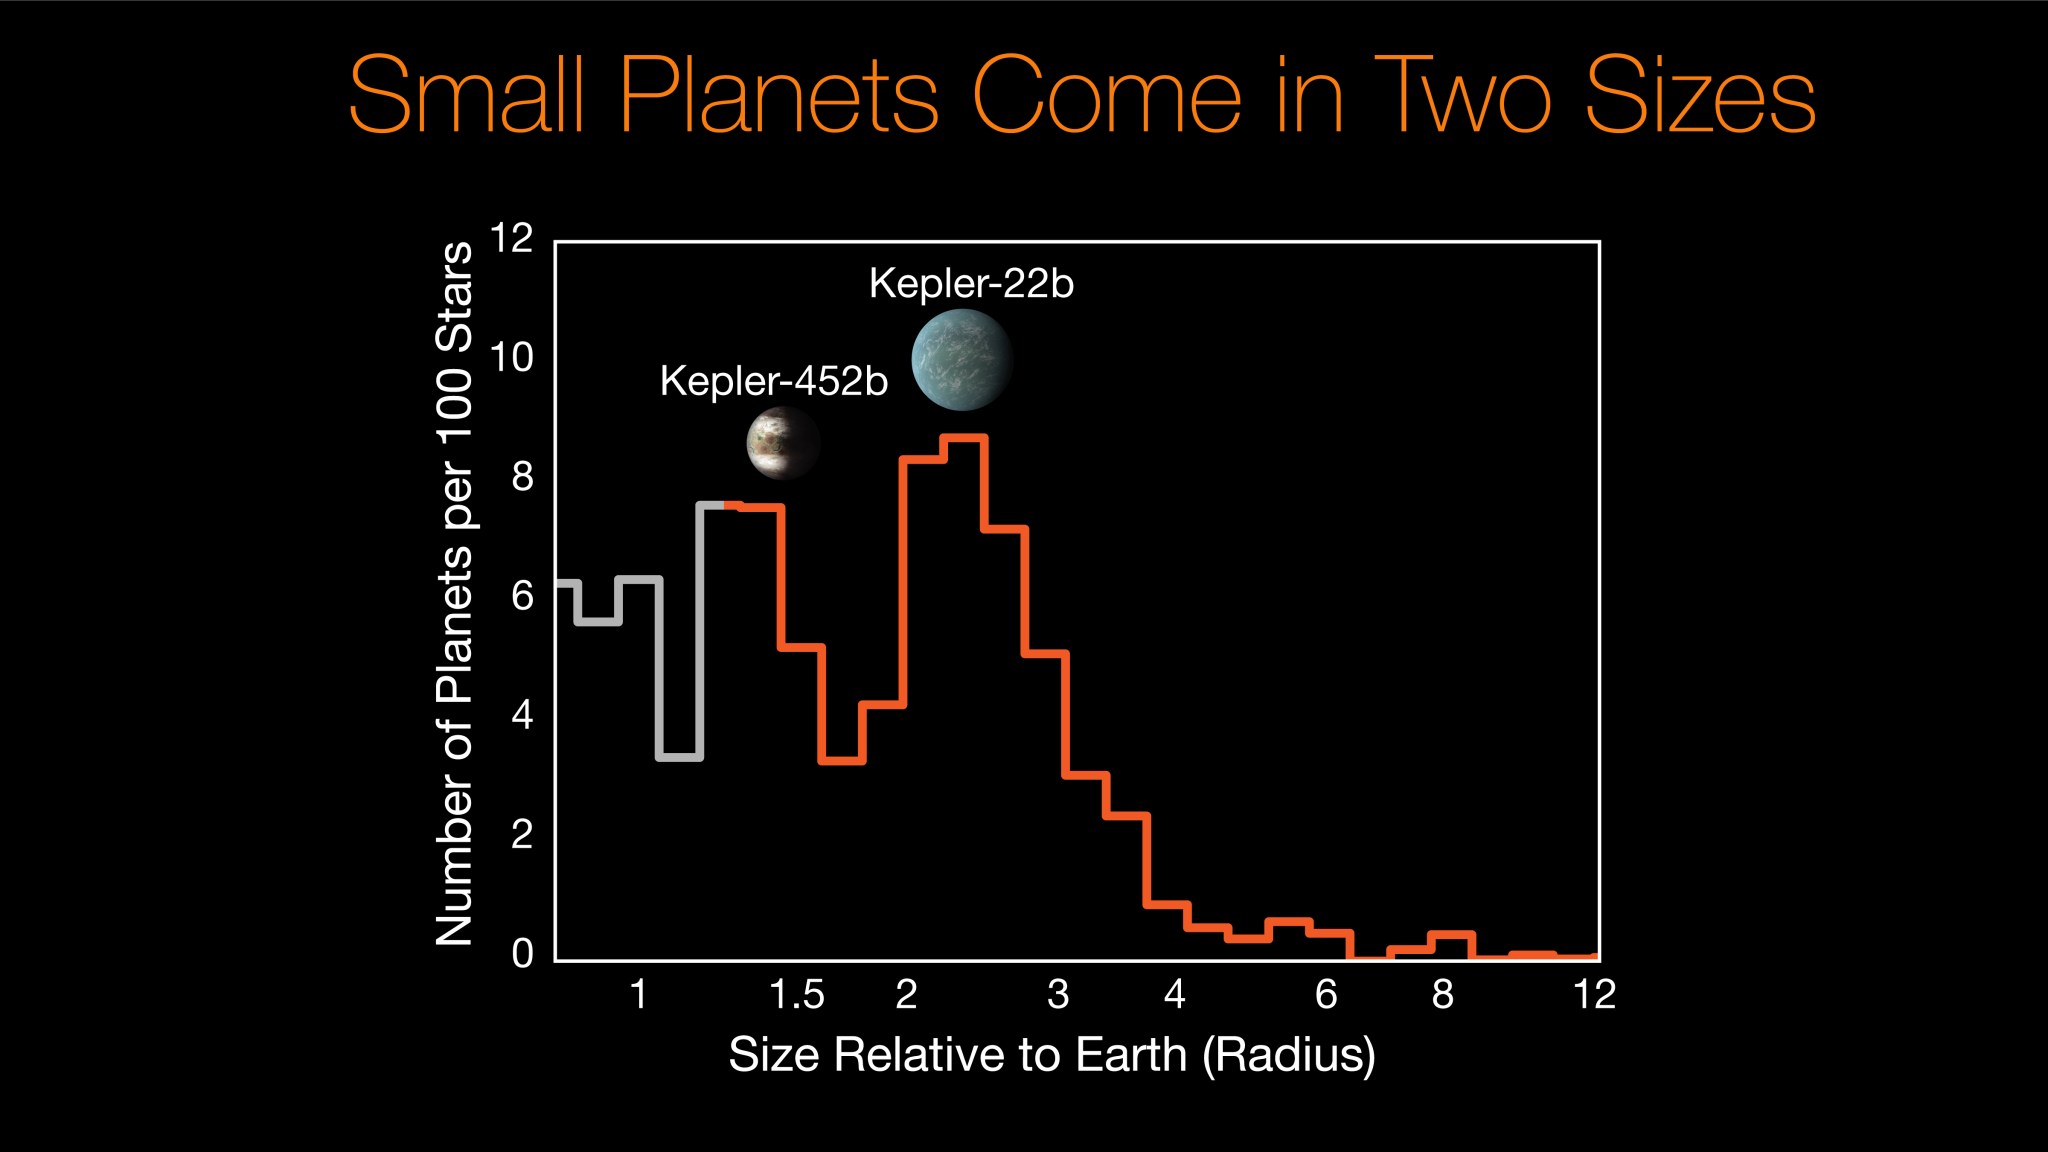 Small Planets Come in Two Sizes